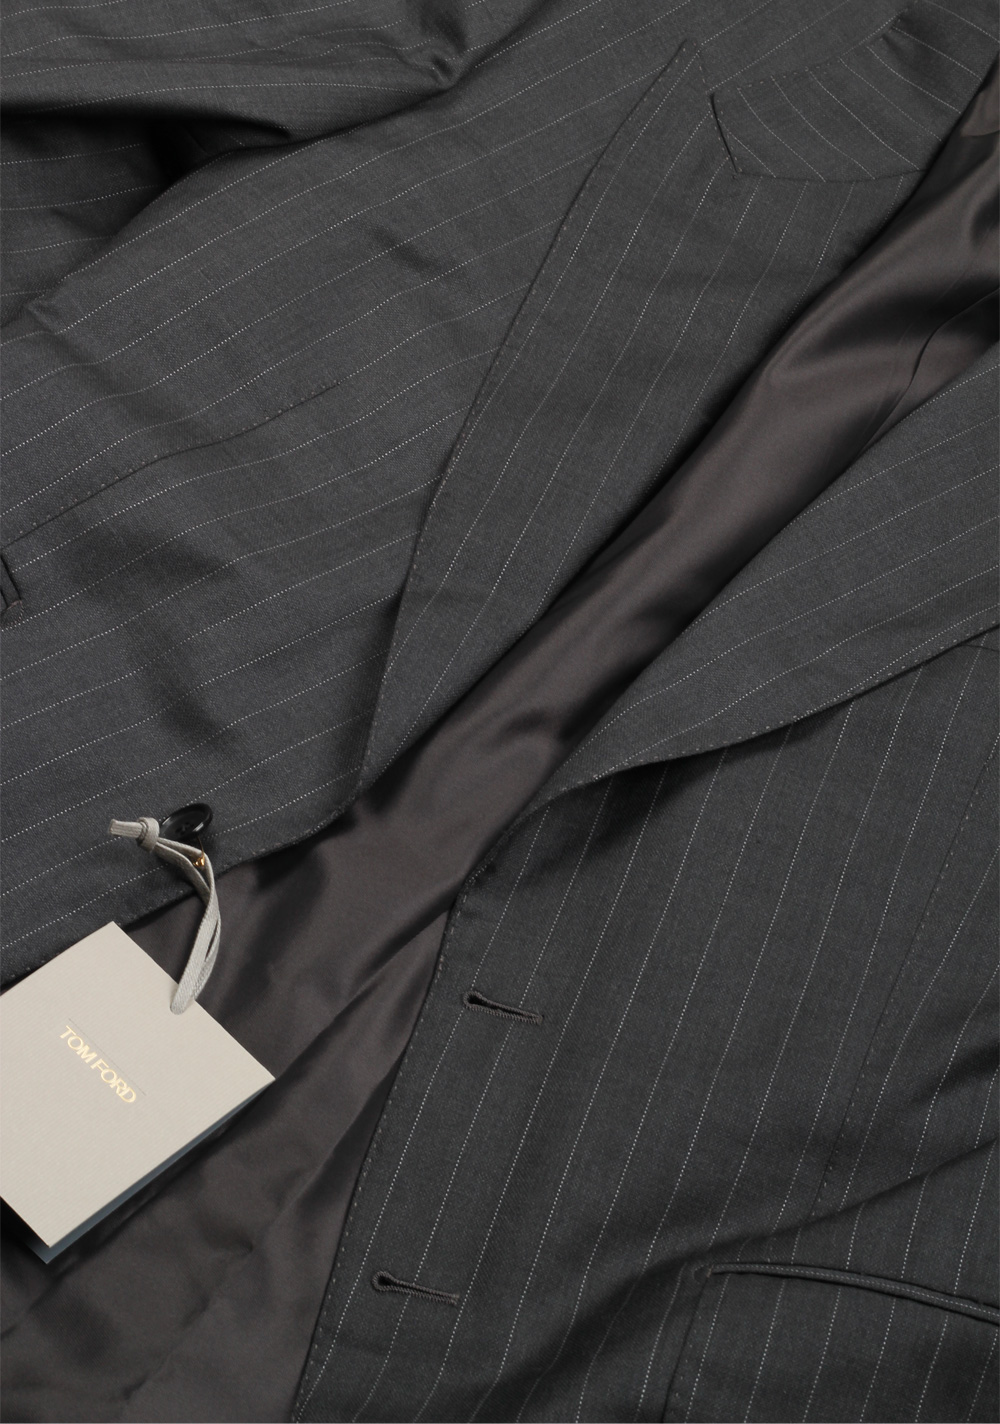 TOM FORD Shelton Striped Gray Suit Size 48 / 38R U.S. In Wool Silk | Costume Limité